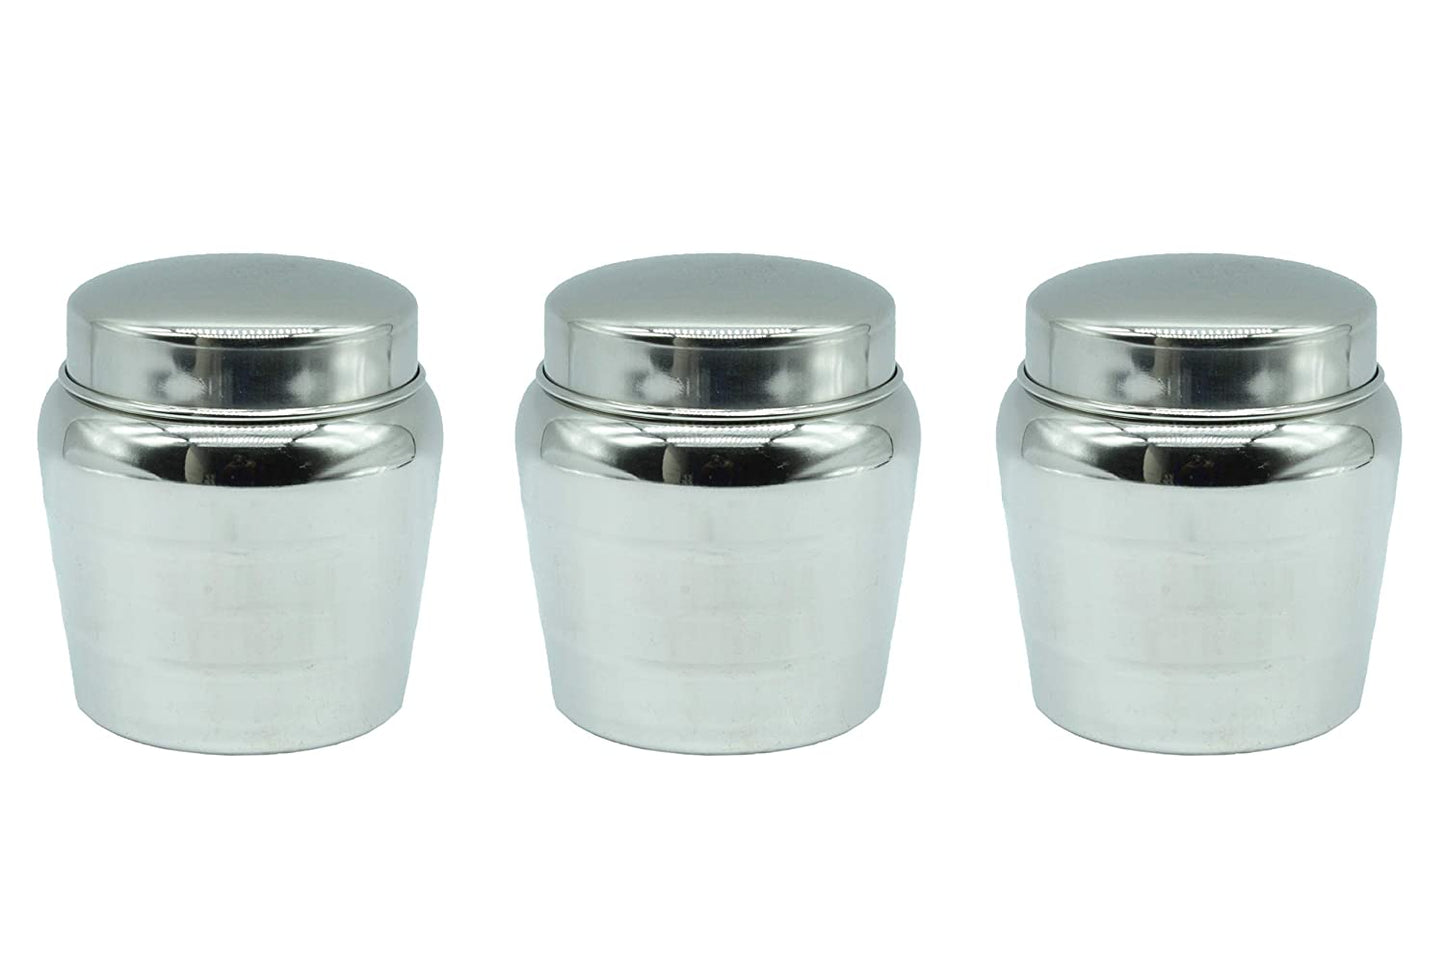 Stainless Steel Mushroom | Tapered Canister Set of 3 Pcs